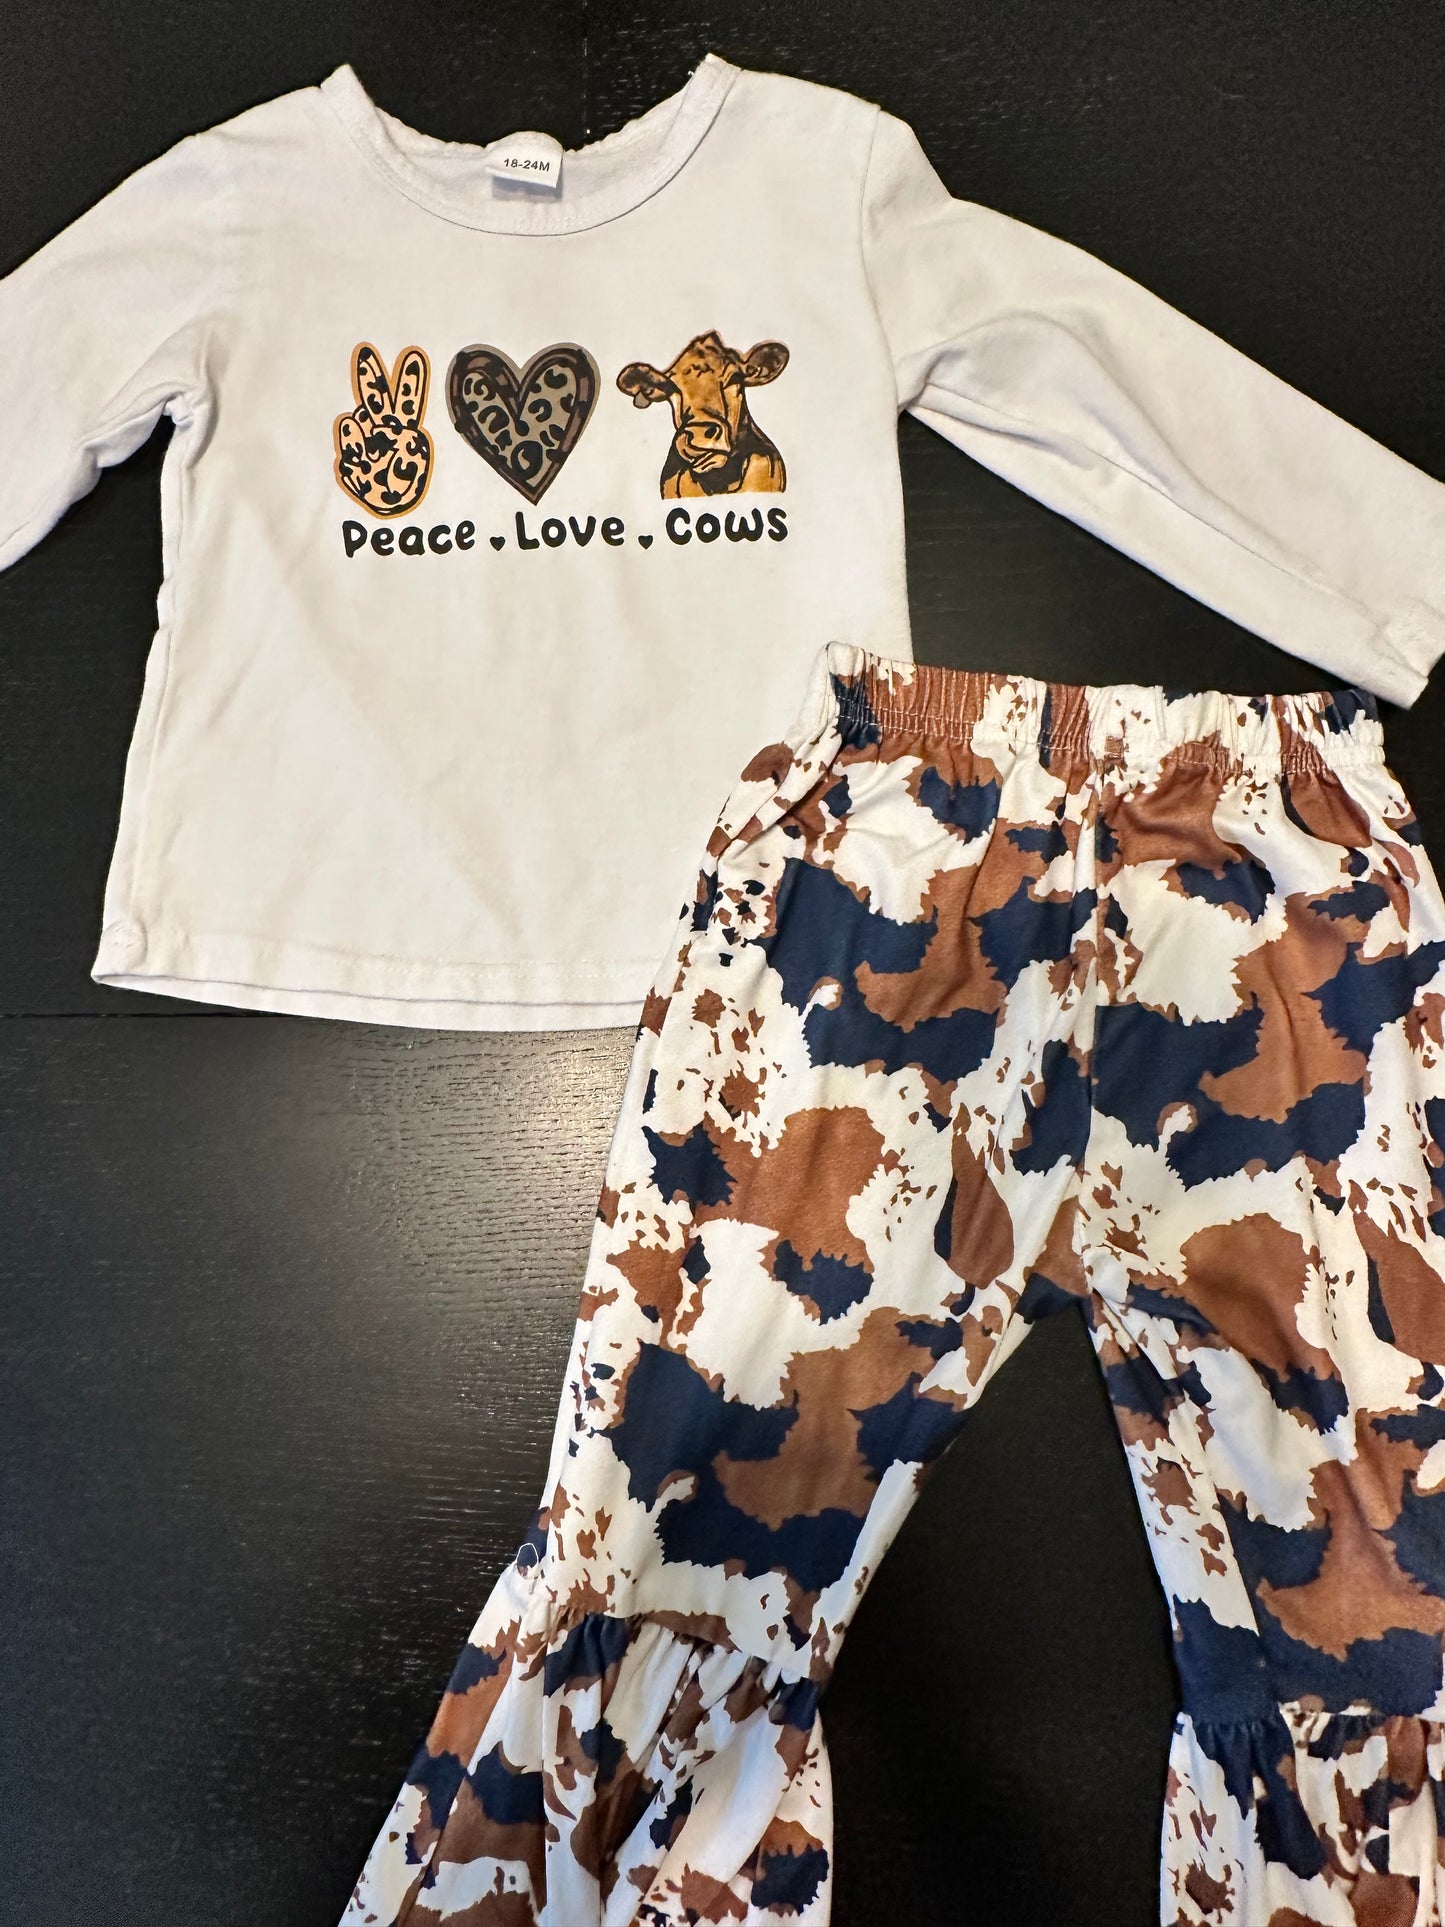 18-24 Month Girl’s Cow Outfit